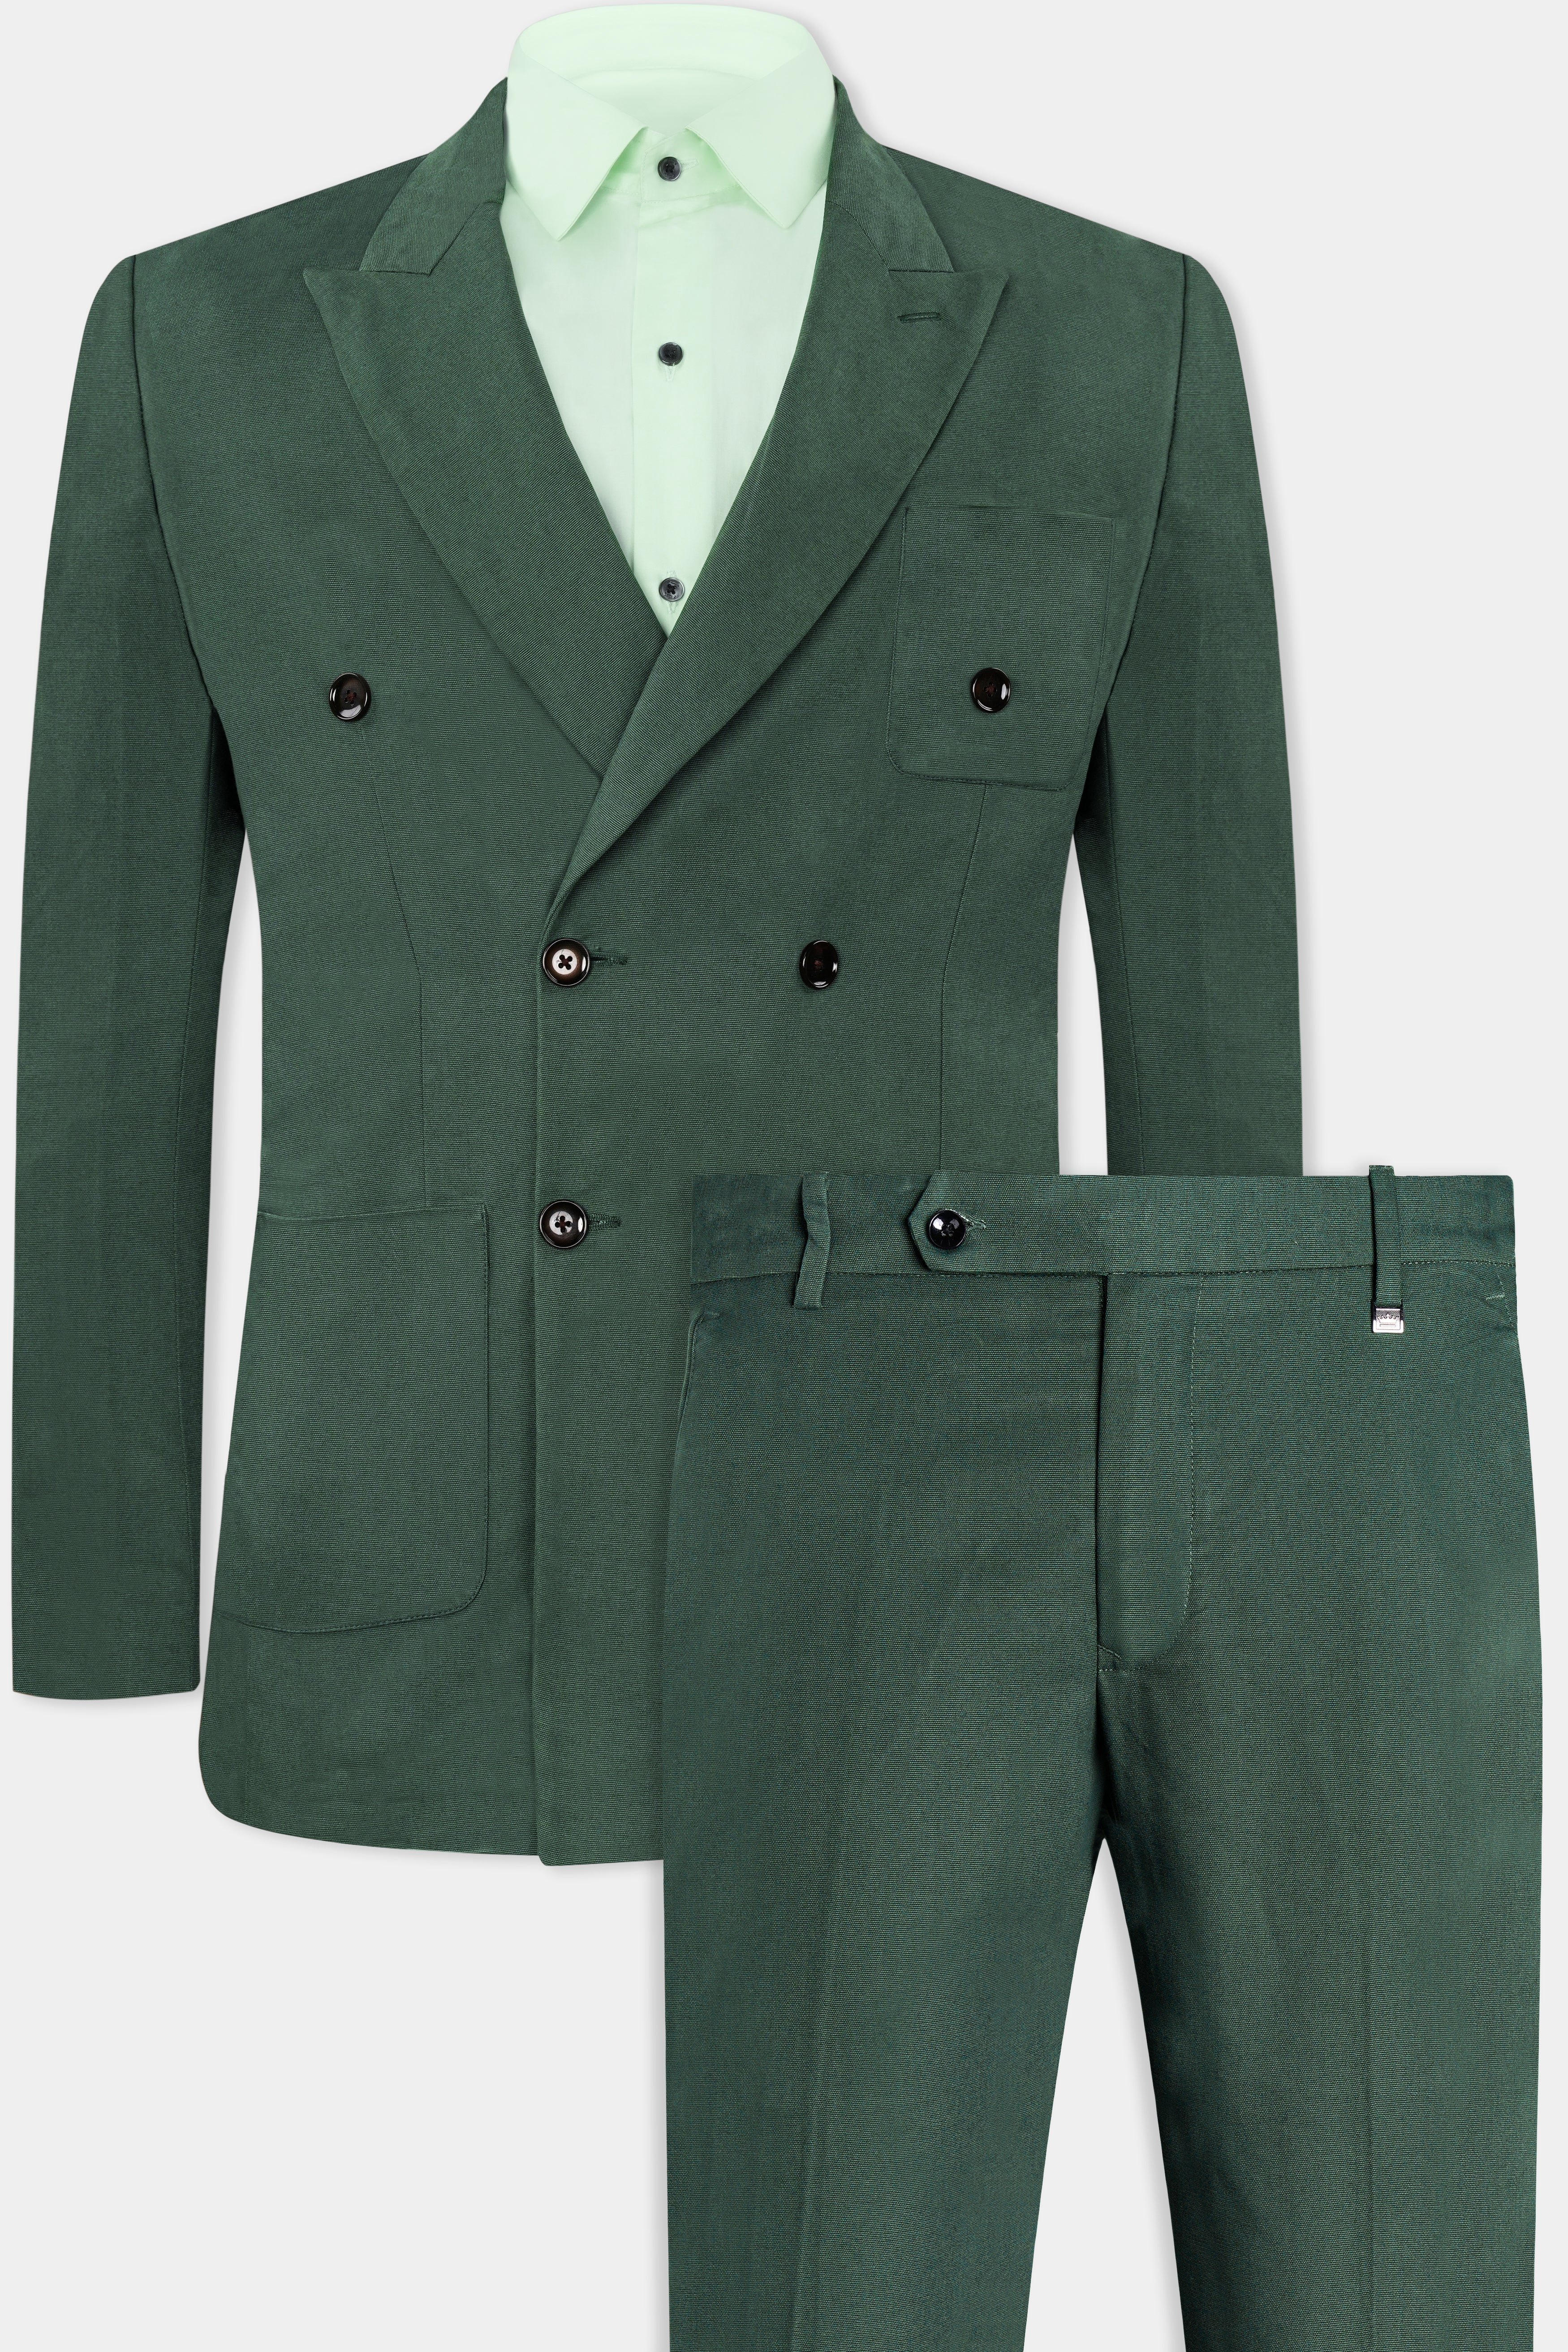 Fern Green Premium Cotton Double Breasted Suit ST2970-DB-PP-36, ST2970-DB-PP-38, ST2970-DB-PP-40, ST2970-DB-PP-42, ST2970-DB-PP-44, ST2970-DB-PP-46, ST2970-DB-PP-48, ST2970-DB-PP-50, ST2970-DB-PP-52, ST2970-DB-PP-54, ST2970-DB-PP-56, ST2970-DB-PP-58, ST2970-DB-PP-60